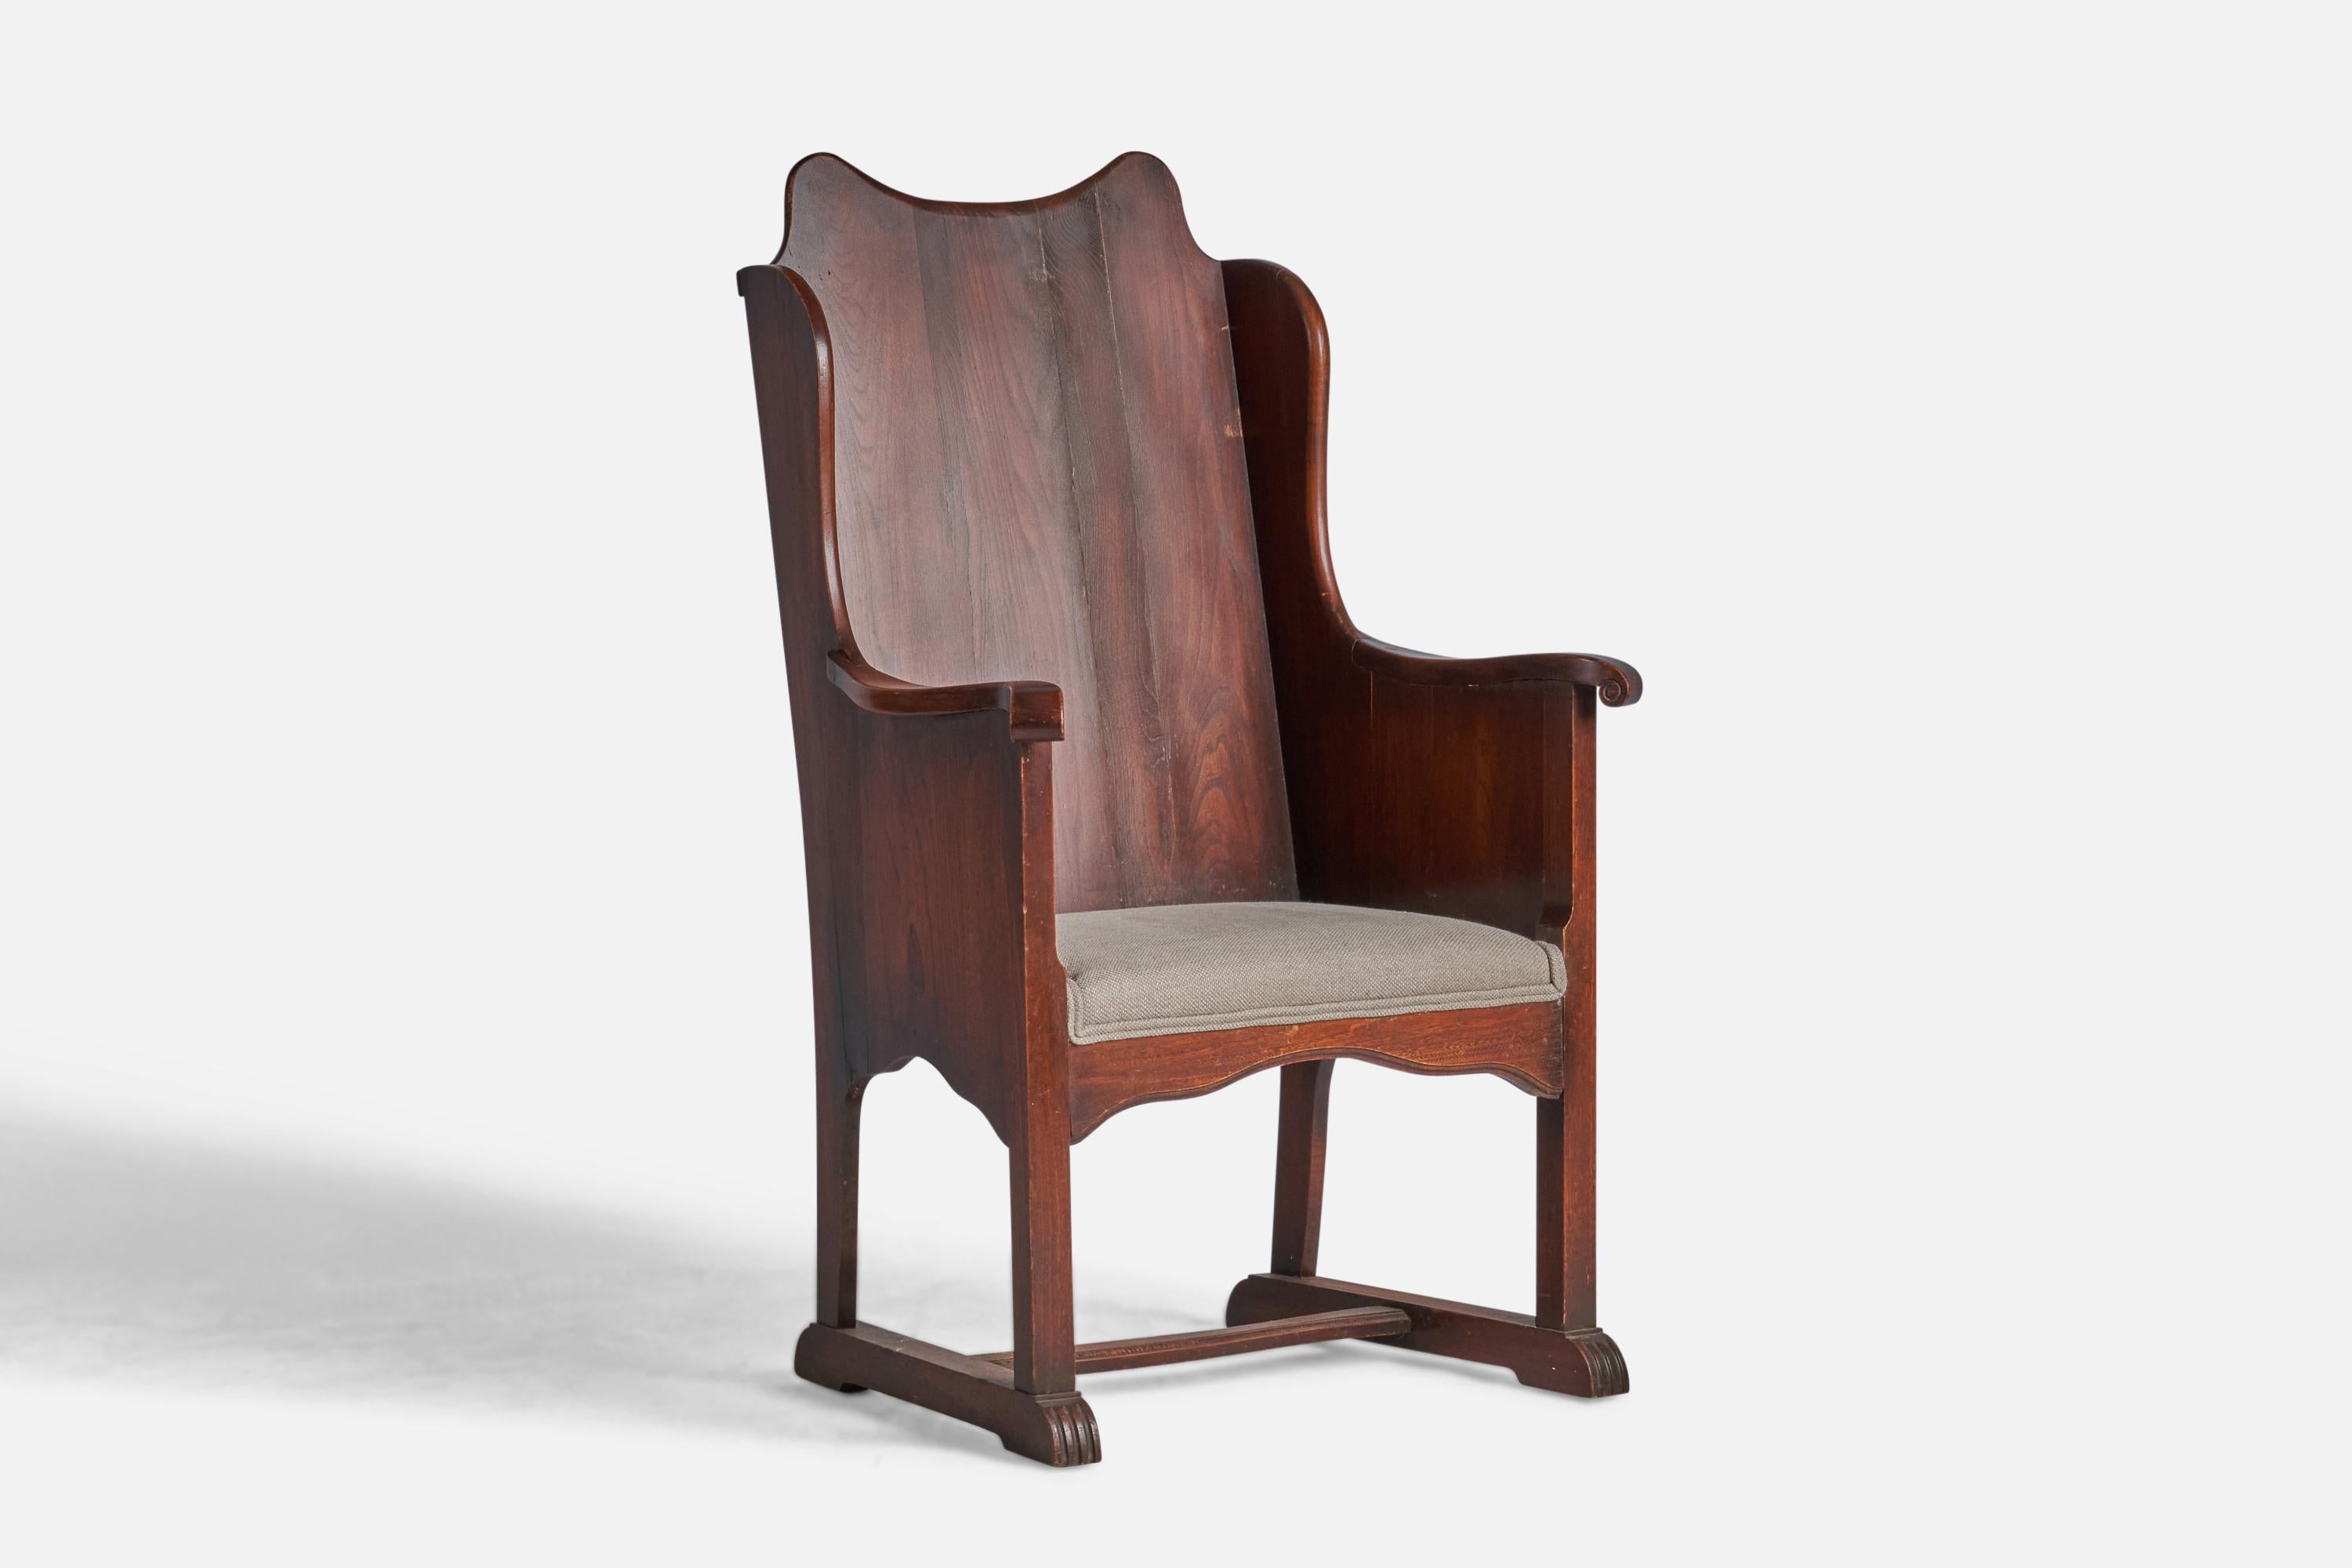 A stained oak and grey beige fabric side or lounge chair designed and produced in the US, c. 1930s.

16.75” seat height